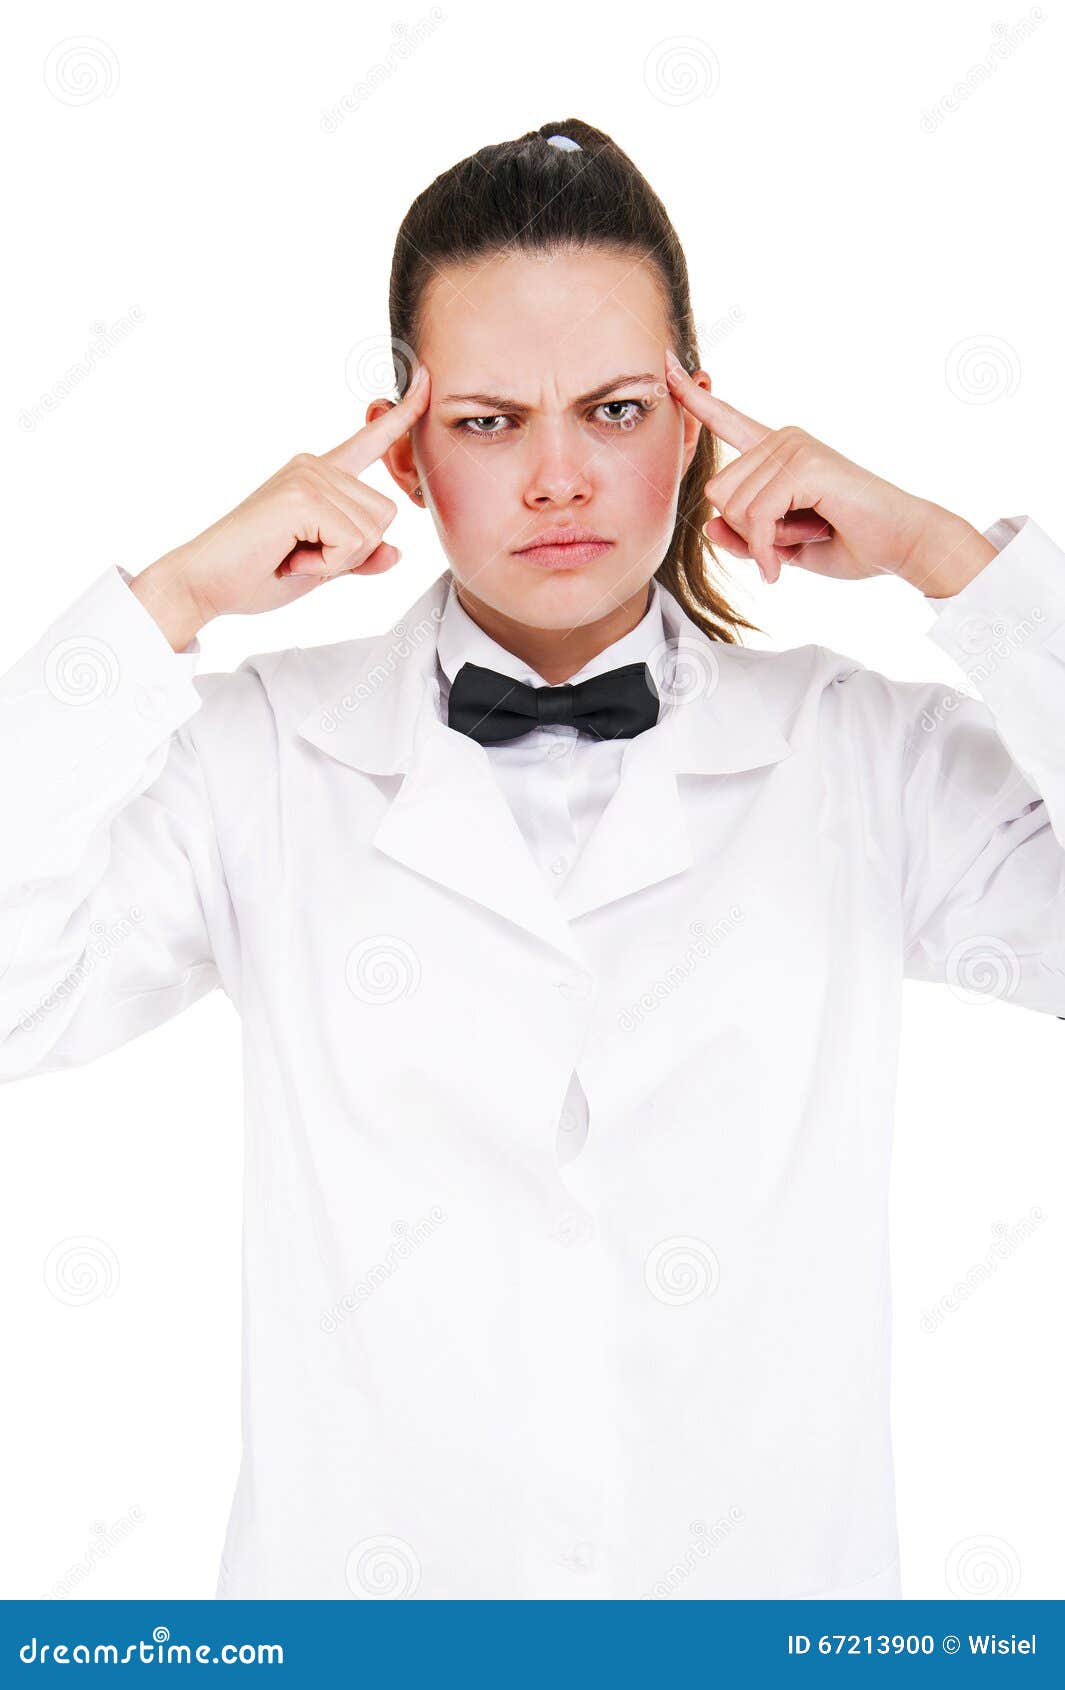 scince woman in lab coat and bow tai with fingers near head.